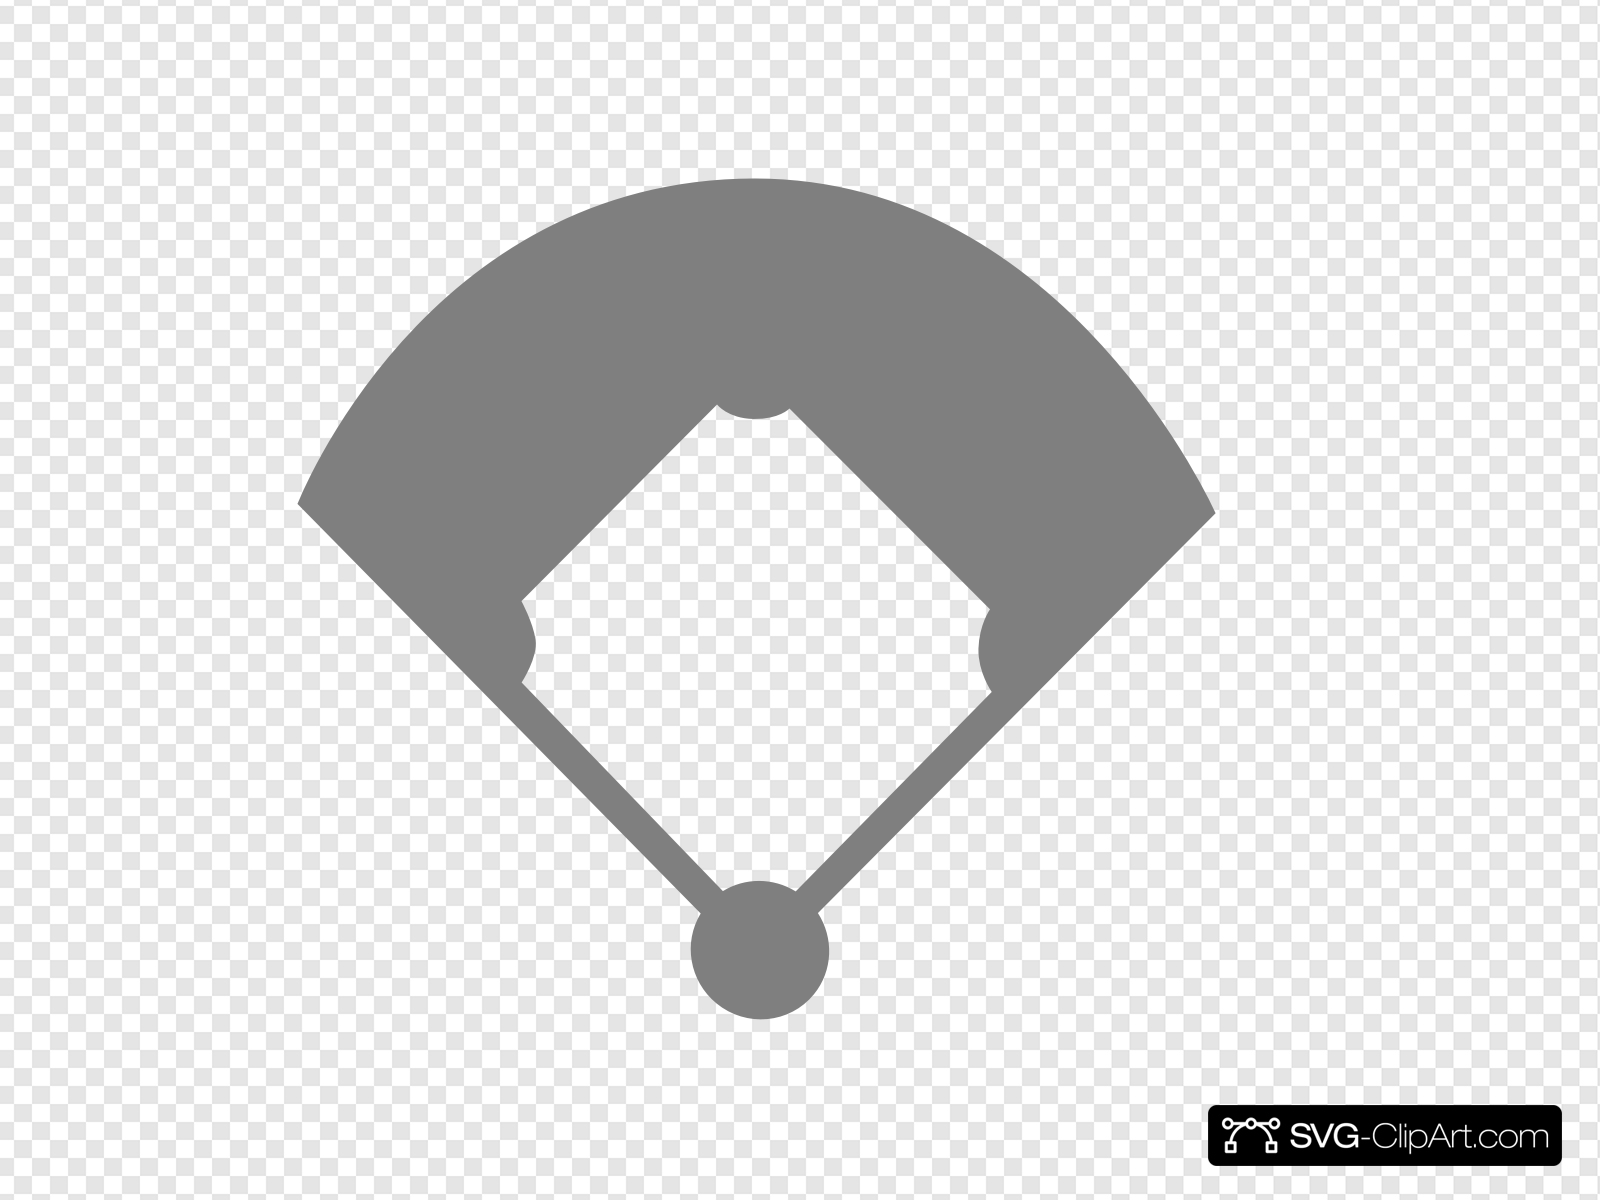 Baseball Field Clip art, Icon and SVG